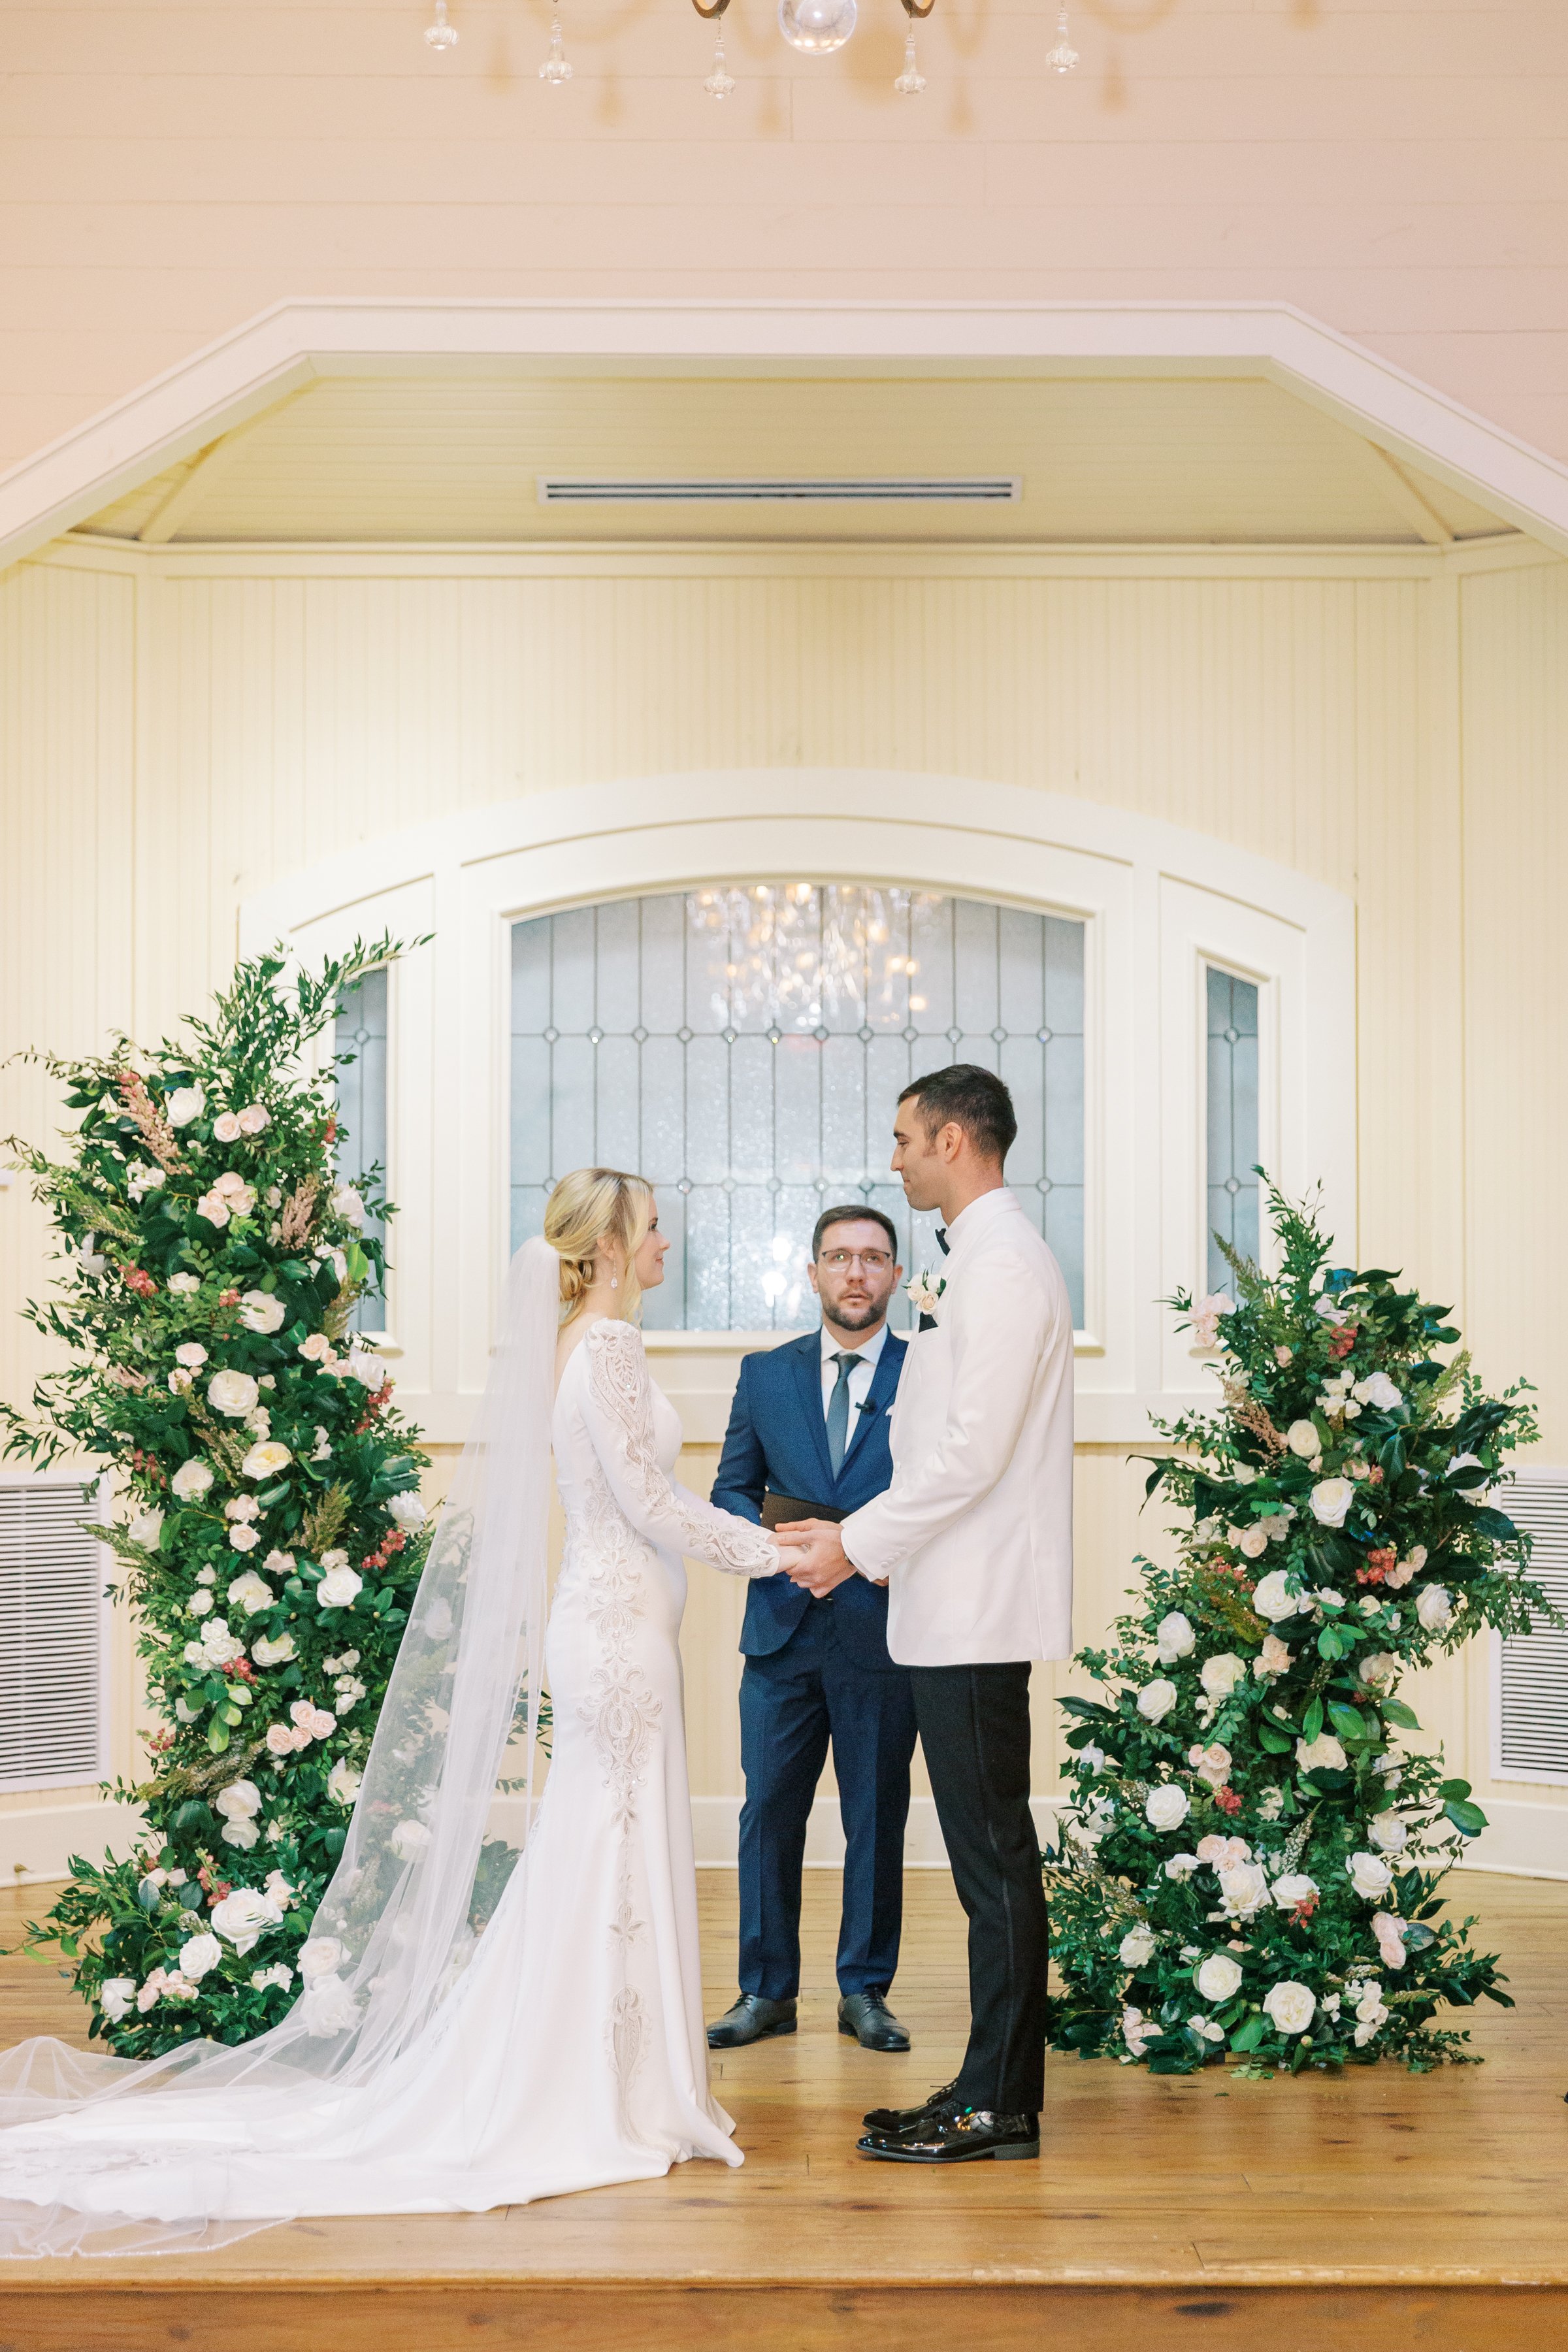 cheyenne-and-nicks-wedding-at-the-tybee-island-wedding-chapel-planned-by-savannah-wedding-planner-ivory-and-beau-with-sottero-and-midgley-gown-from-savannah-bridal-shop-and-wedding-florals-from-savannah-florist-11.jpg